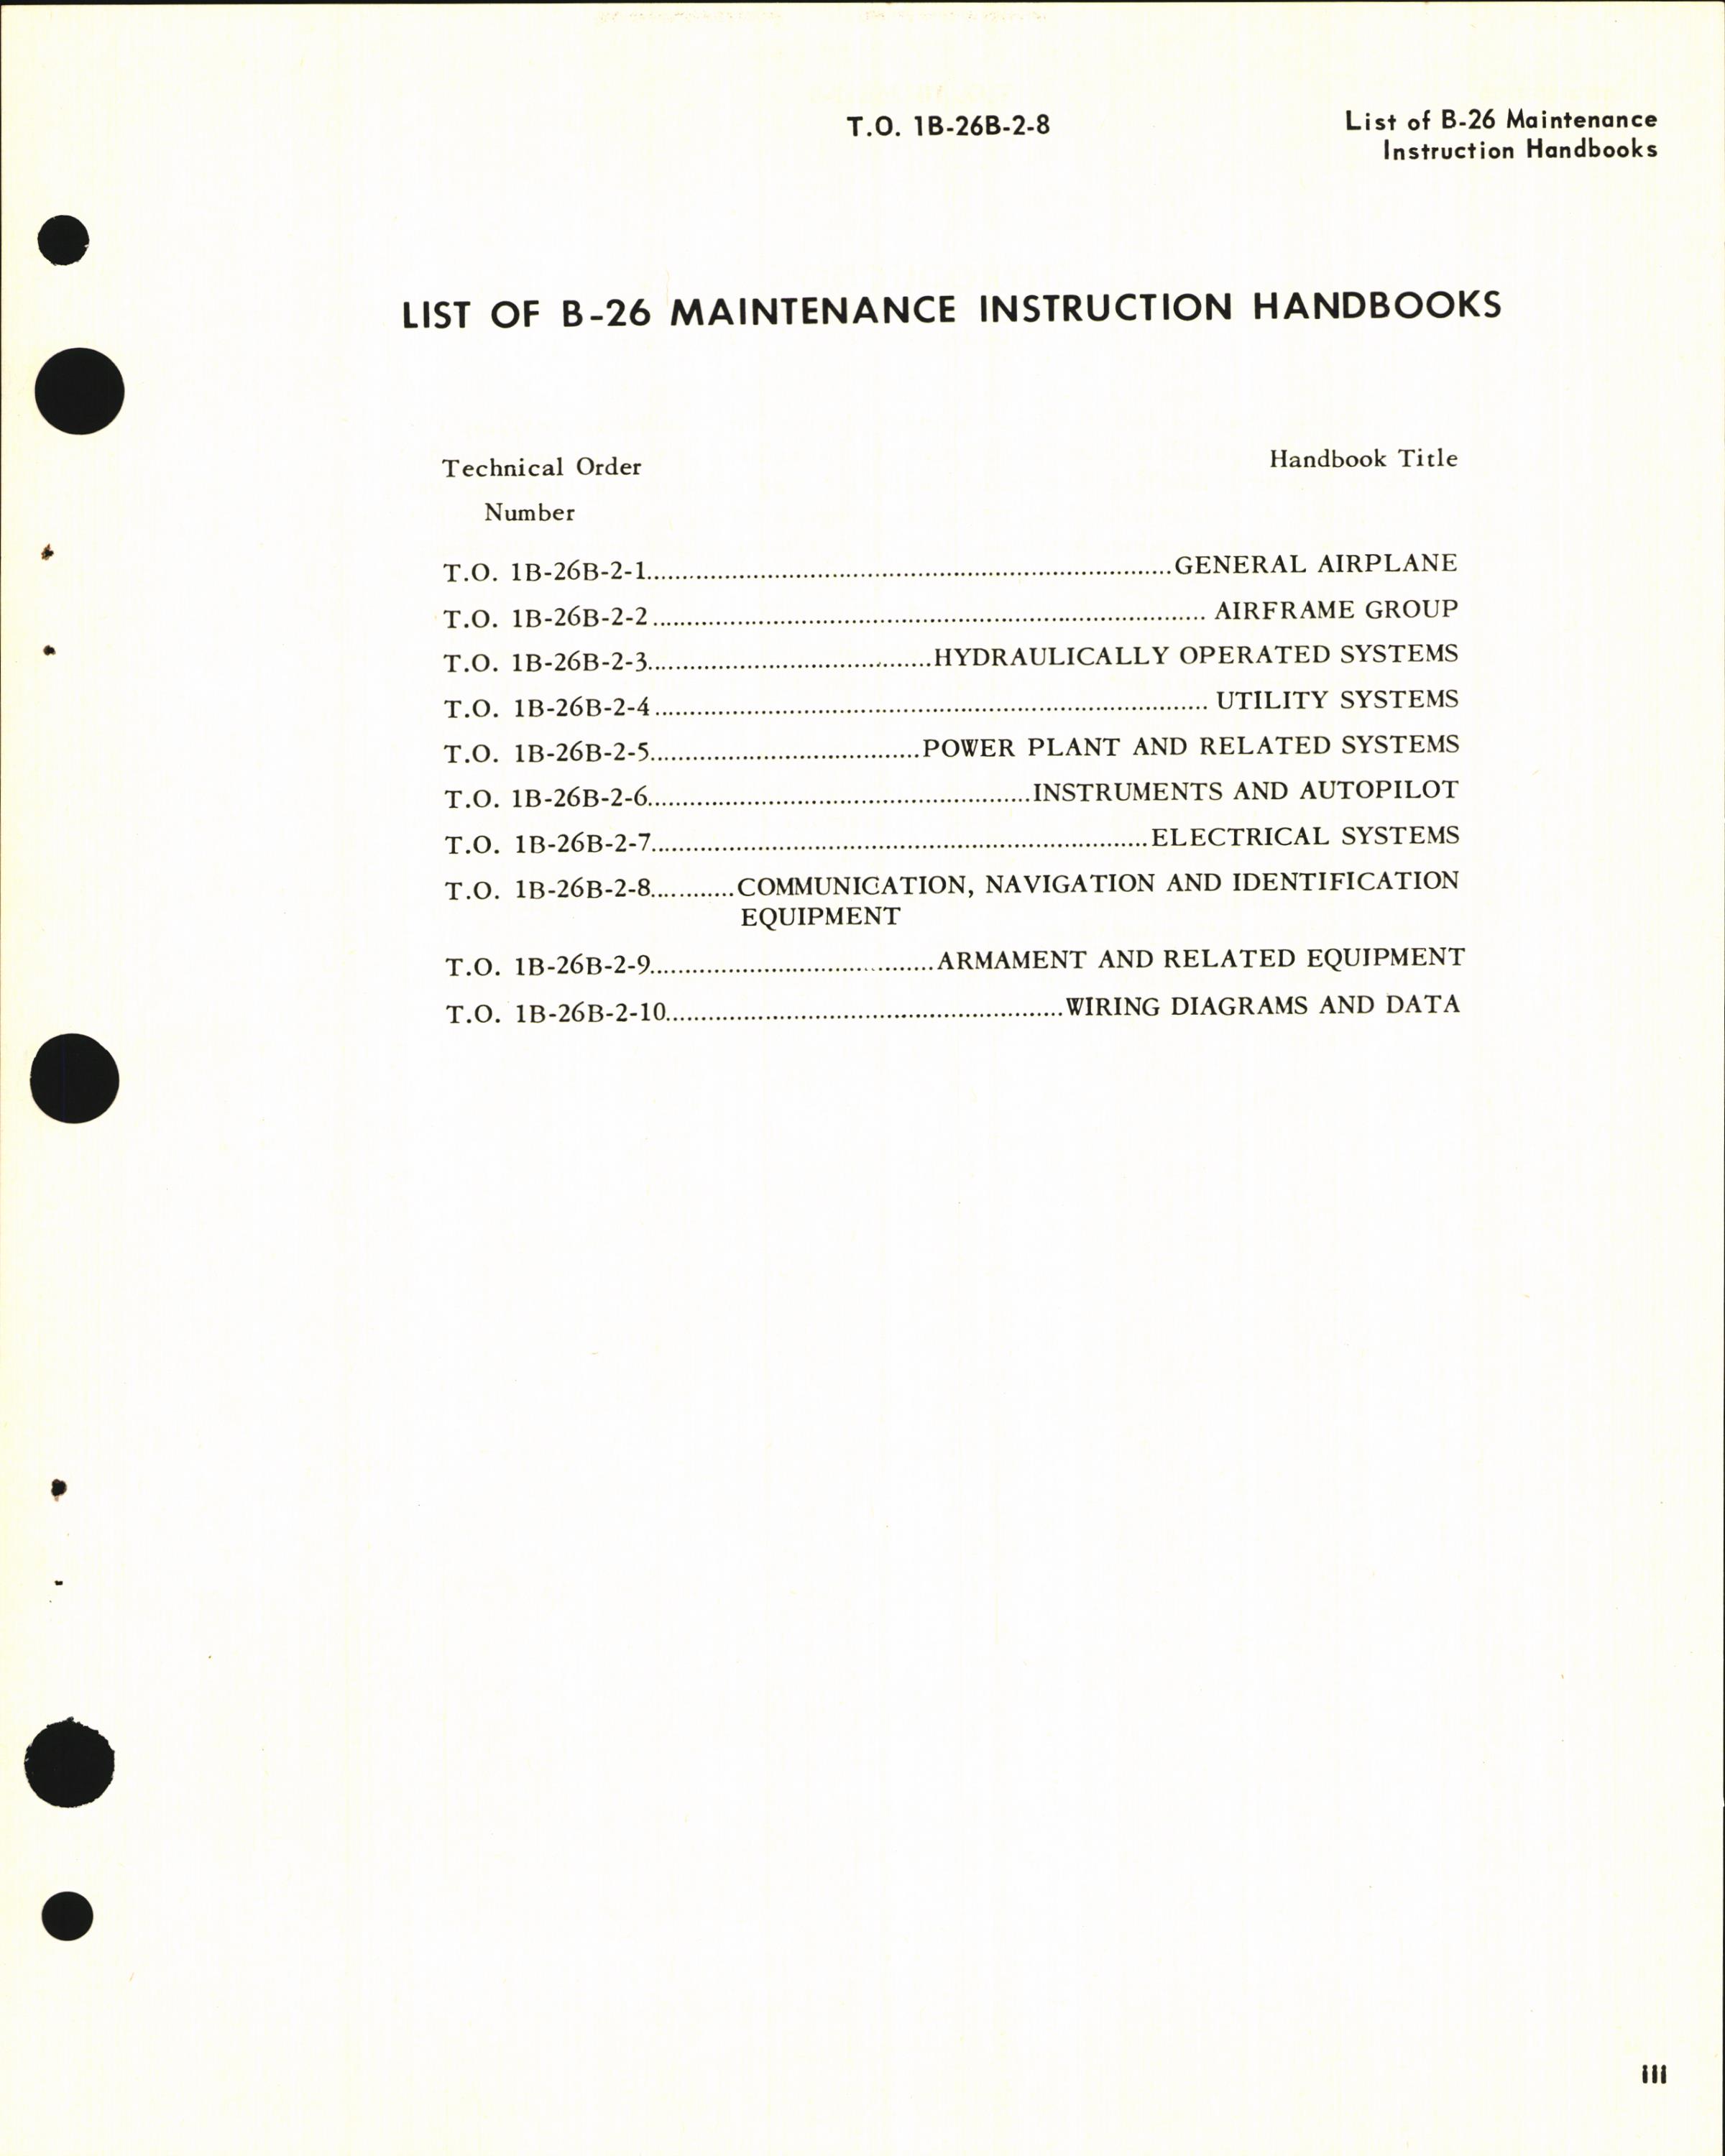 Sample page 5 from AirCorps Library document: Maintenance Instructions for B-26B, B-26C, TB-26B, TB-26C, and JD-1 - Communication, Navigation, & Identification Equip